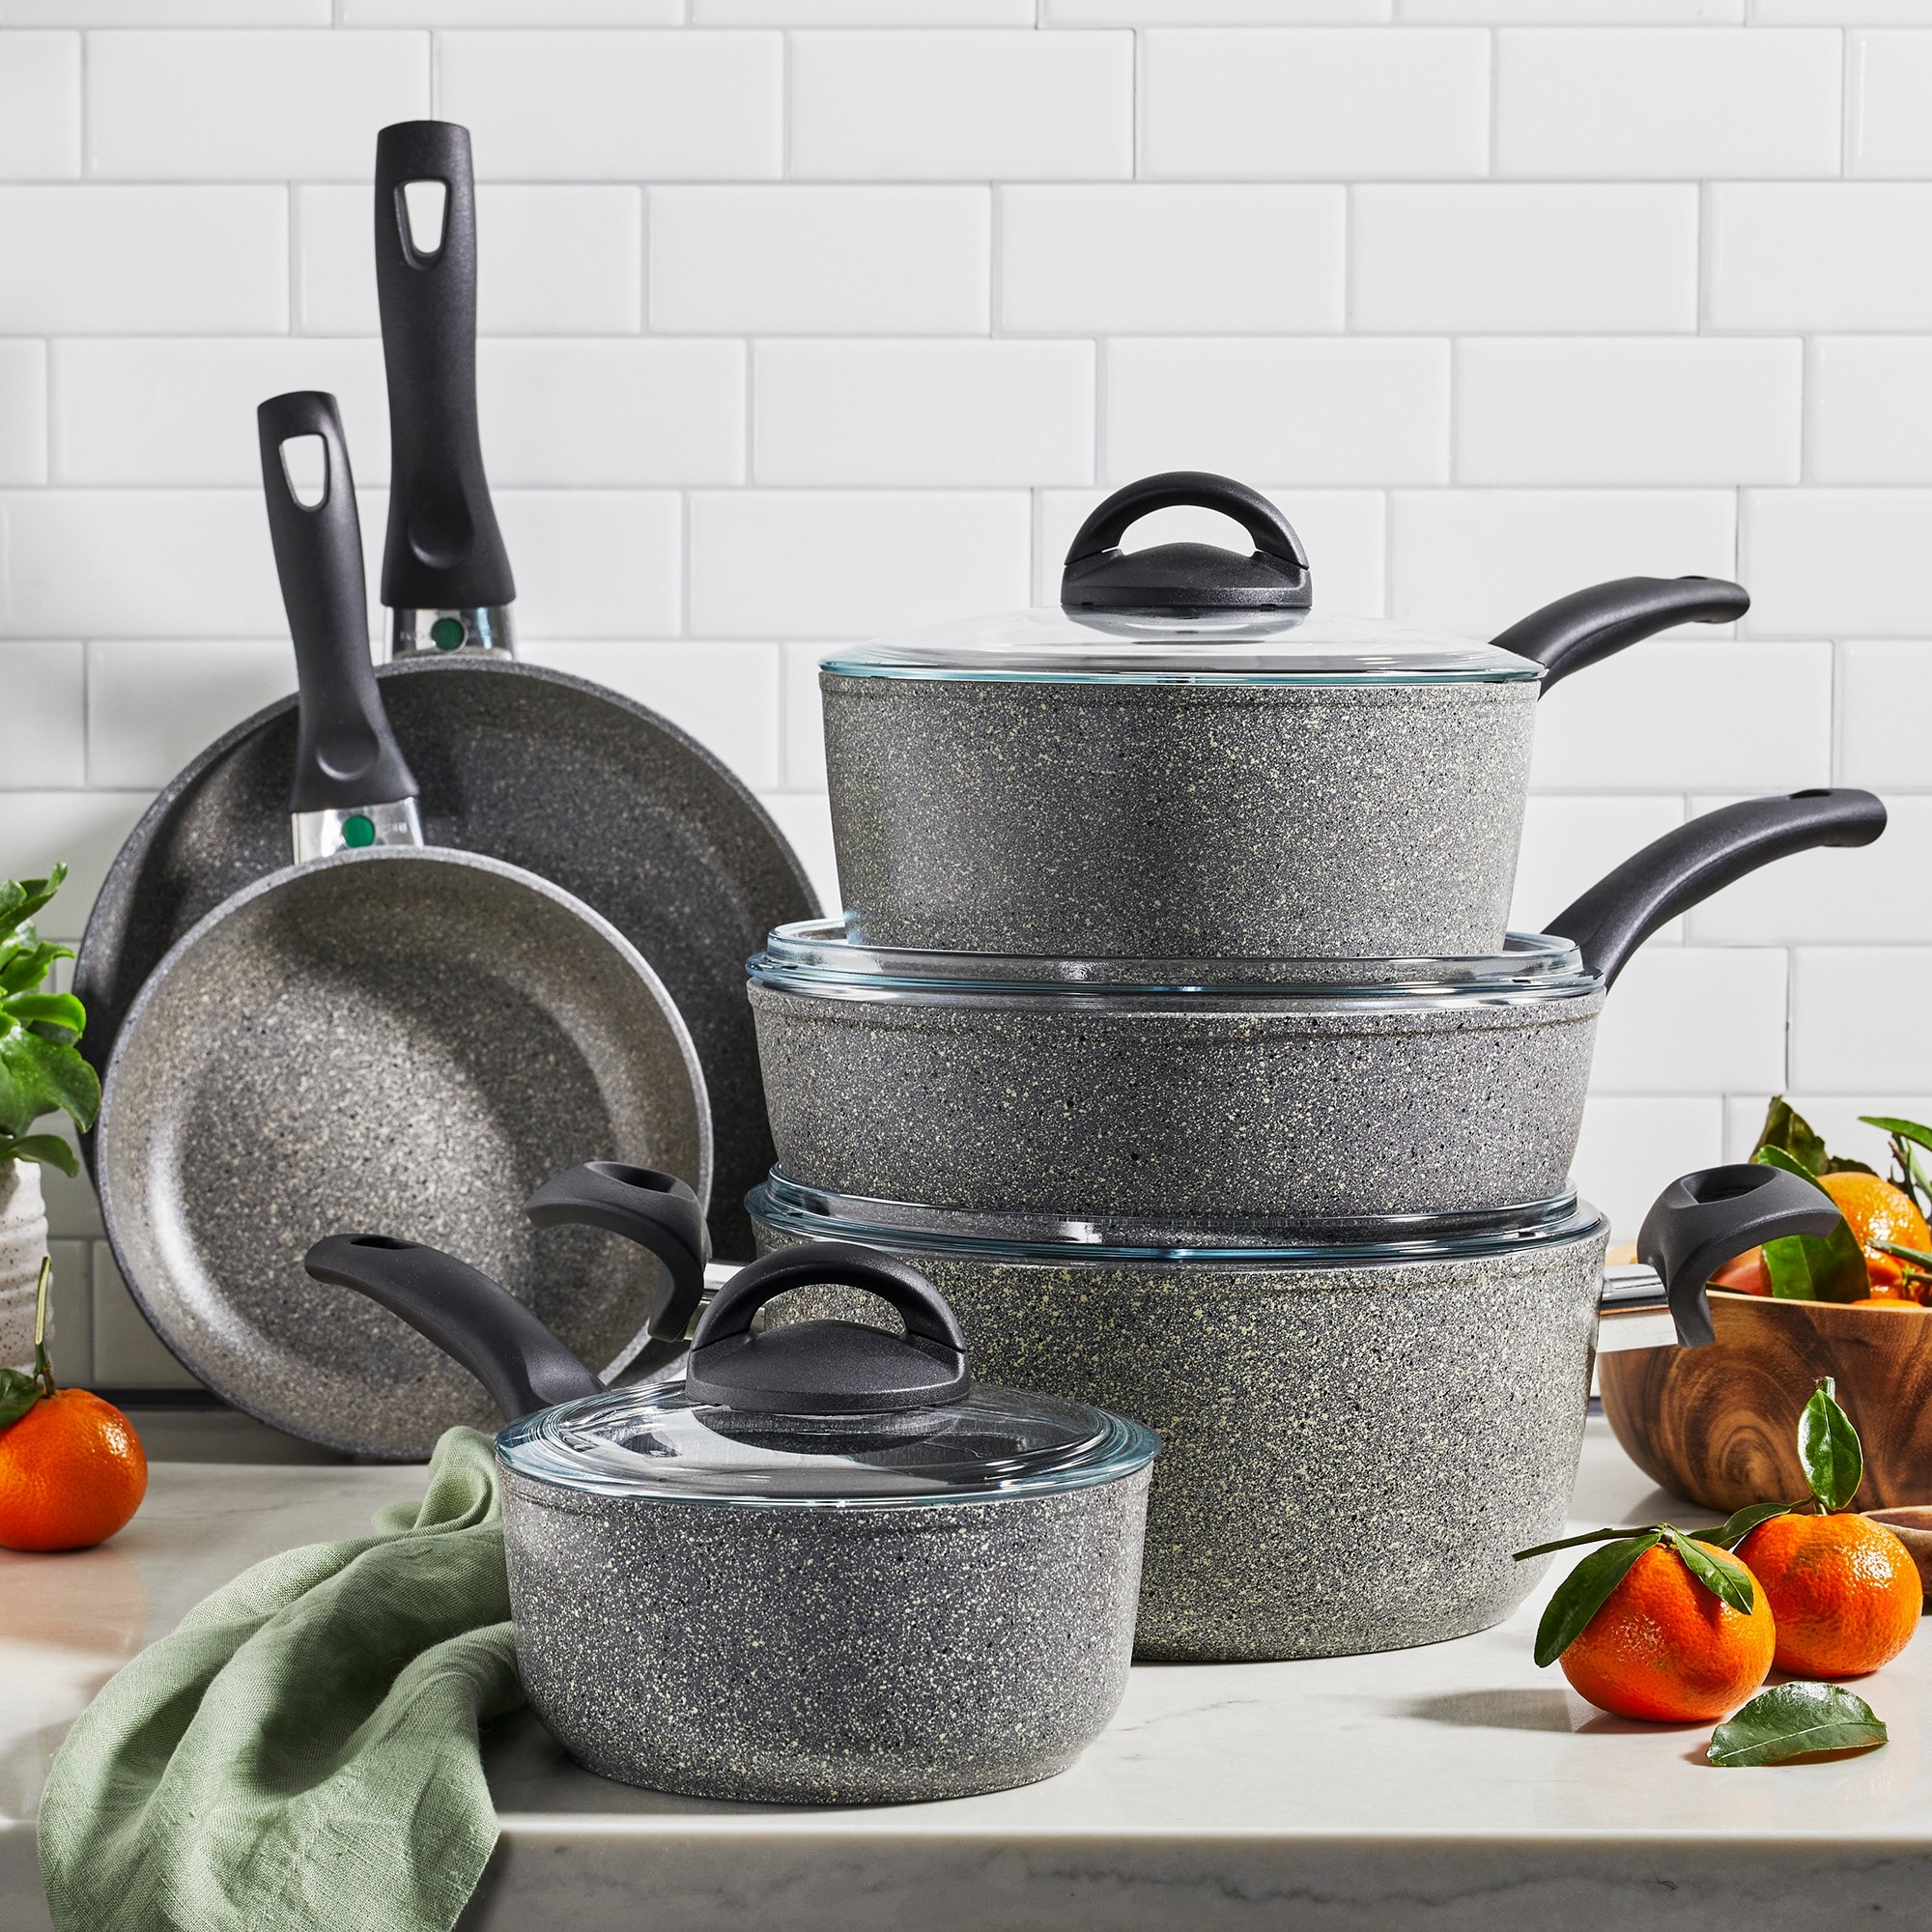 BALLARINI Parma by HENCKELS 10-Piece Forged Aluminum Nonstick Cookware Set,  Pots and Pans Set, Granite, Made in Italy - Bed Bath & Beyond - 14291799